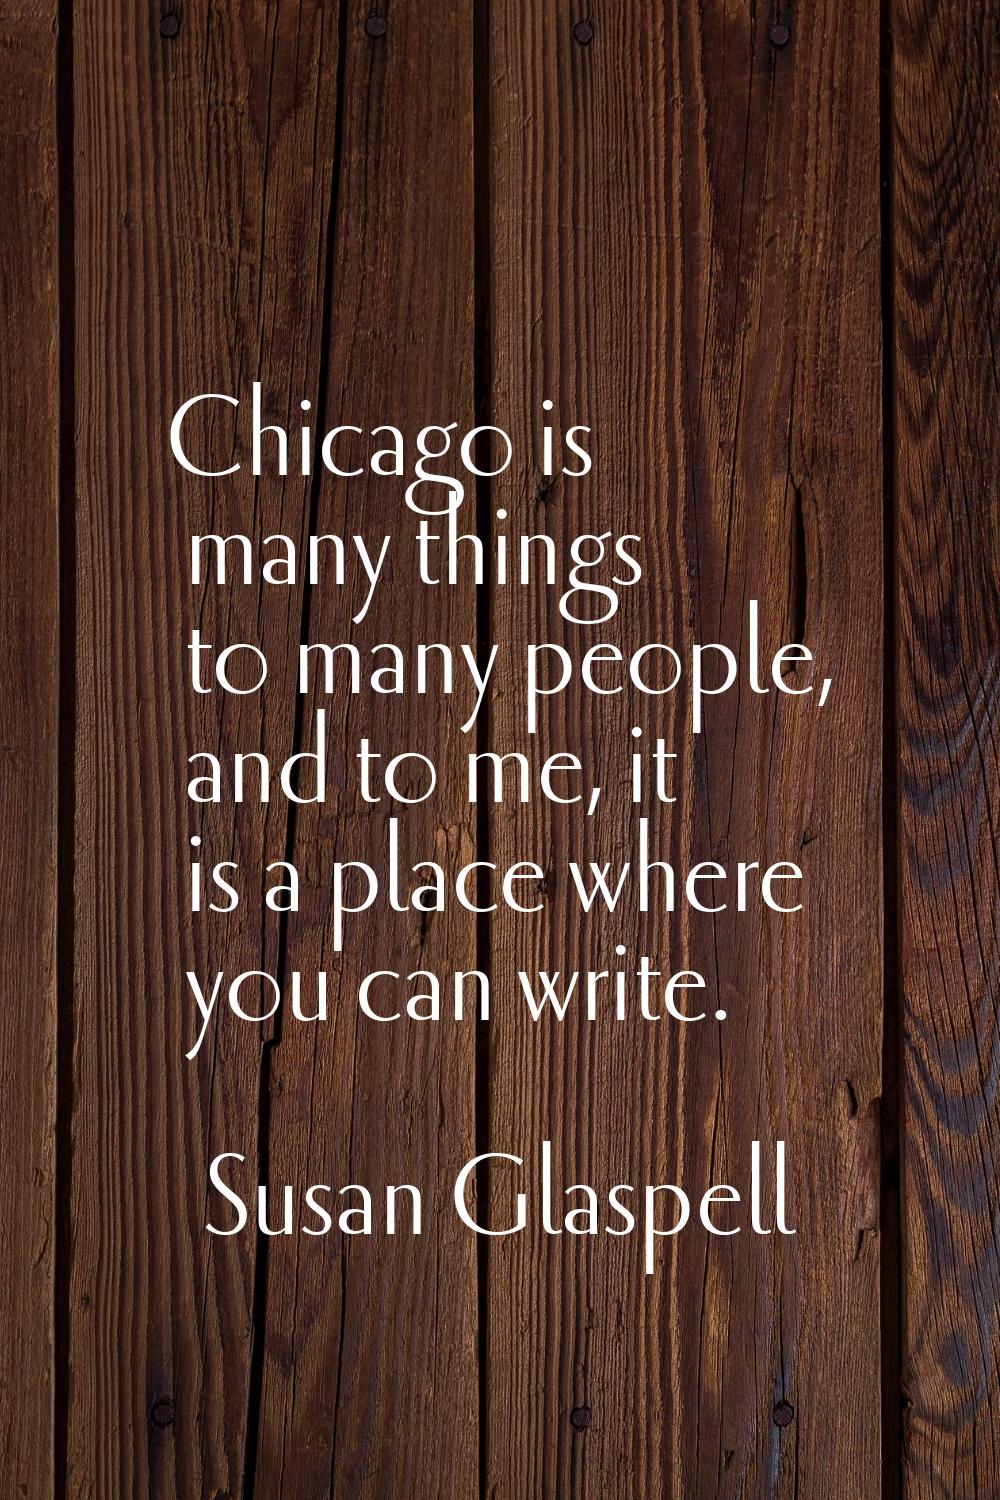 Chicago is many things to many people, and to me, it is a place where you can write.